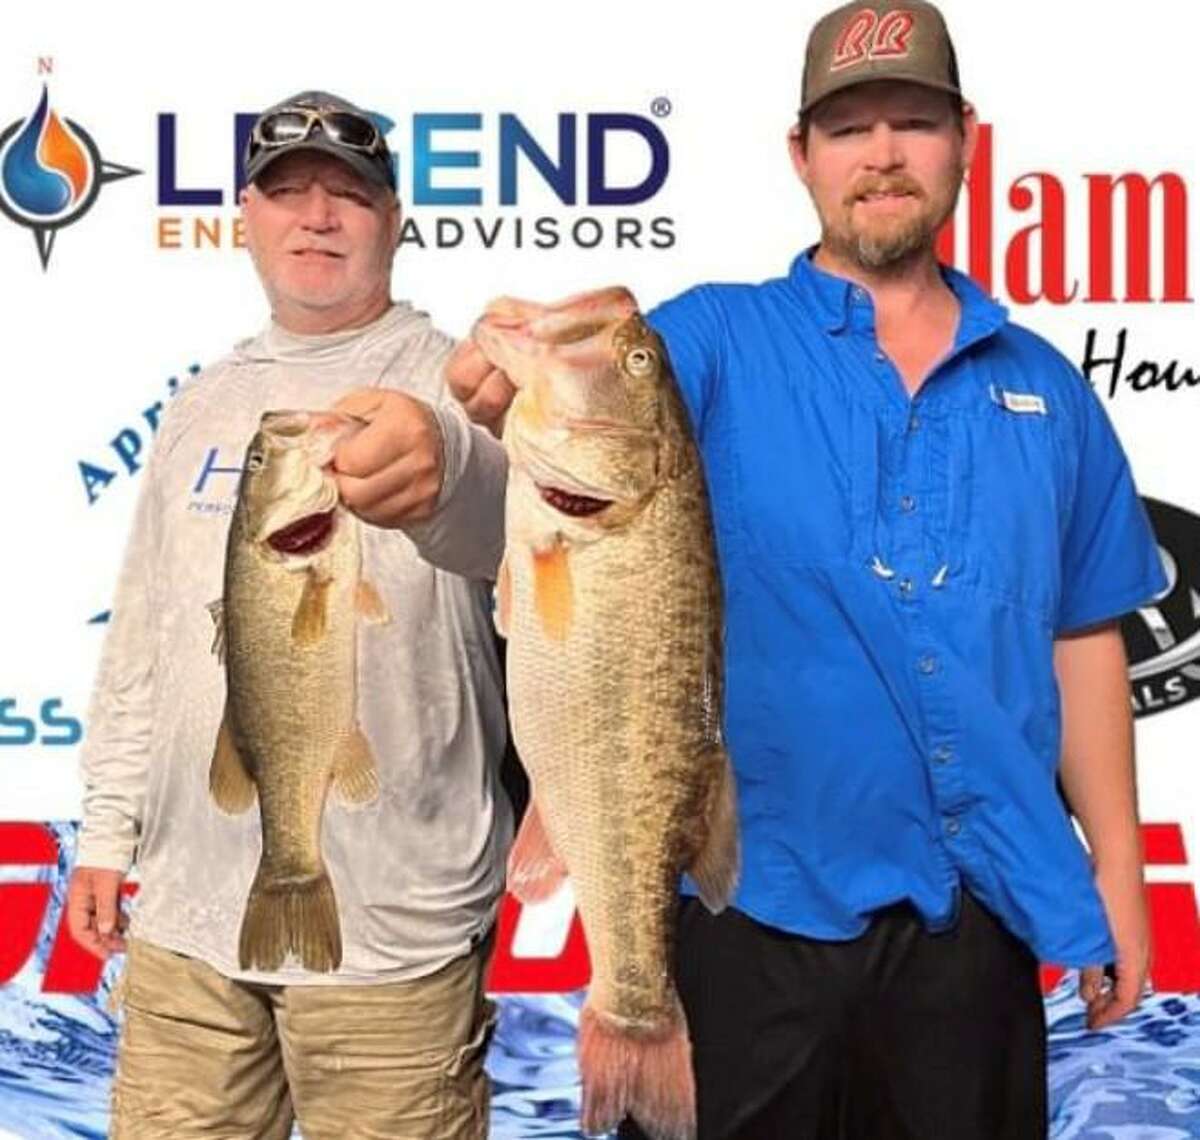 Tim and Evan Carlson came in third place in the CONROEBASS Tuesday Tournament with a stringer weight of 9.90 pounds. They also had big bass for the night weighing 7.76 pounds.